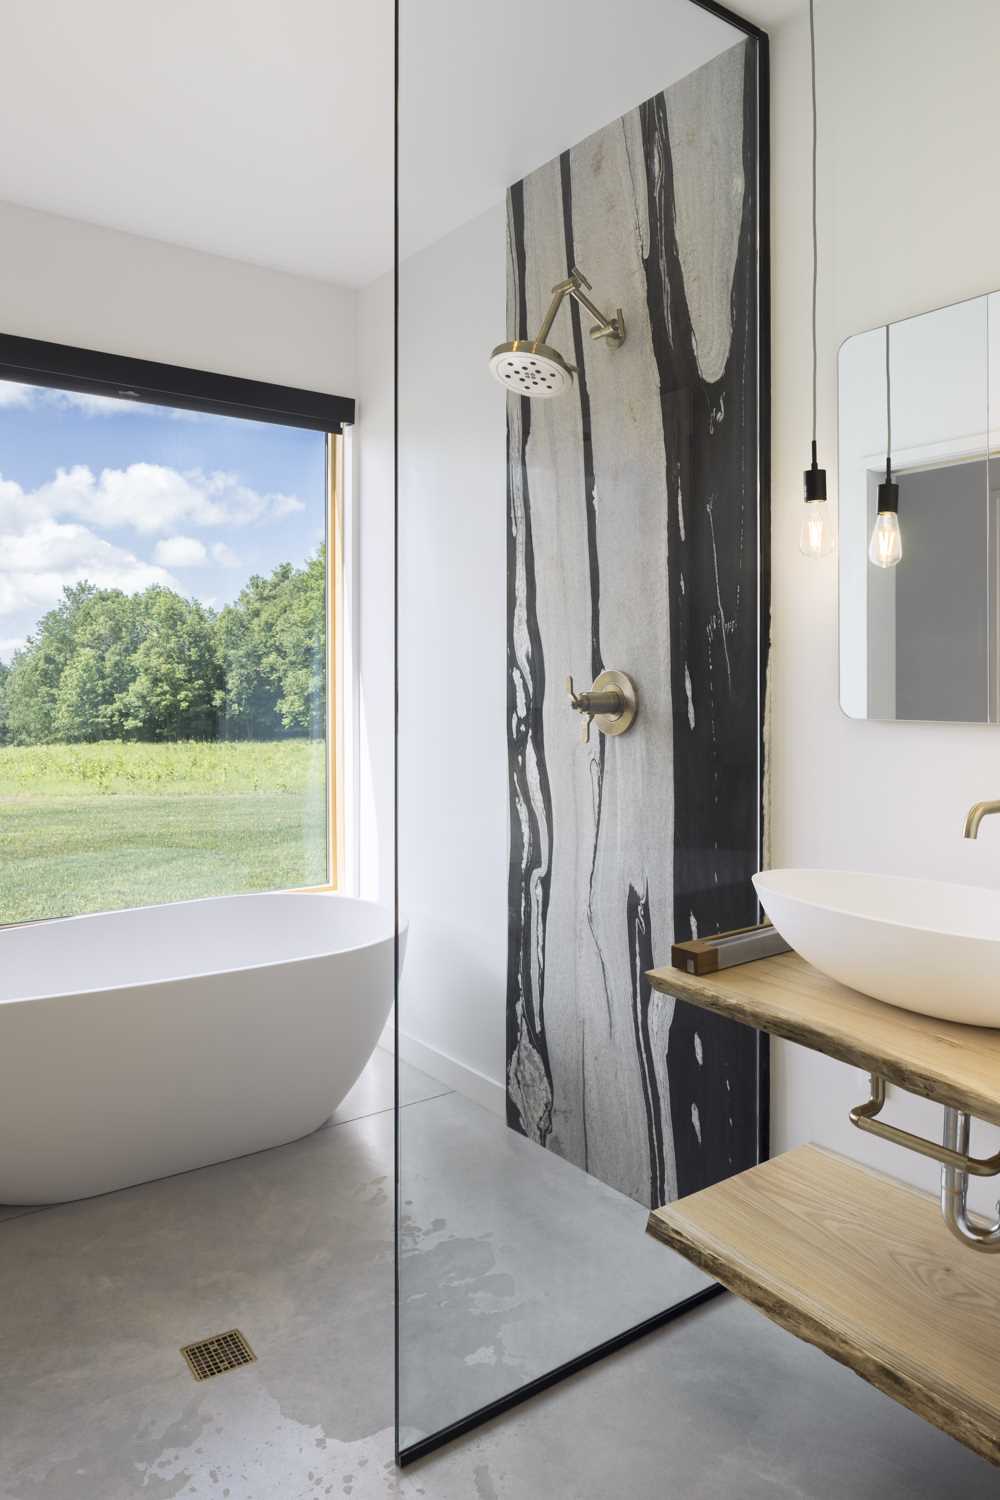 In this modern bathroom, locally sourced oak slabs form the vanity, while brass fixtures from Brizo are water-conservation conscious, and a large window provides unobstructed views of the field.